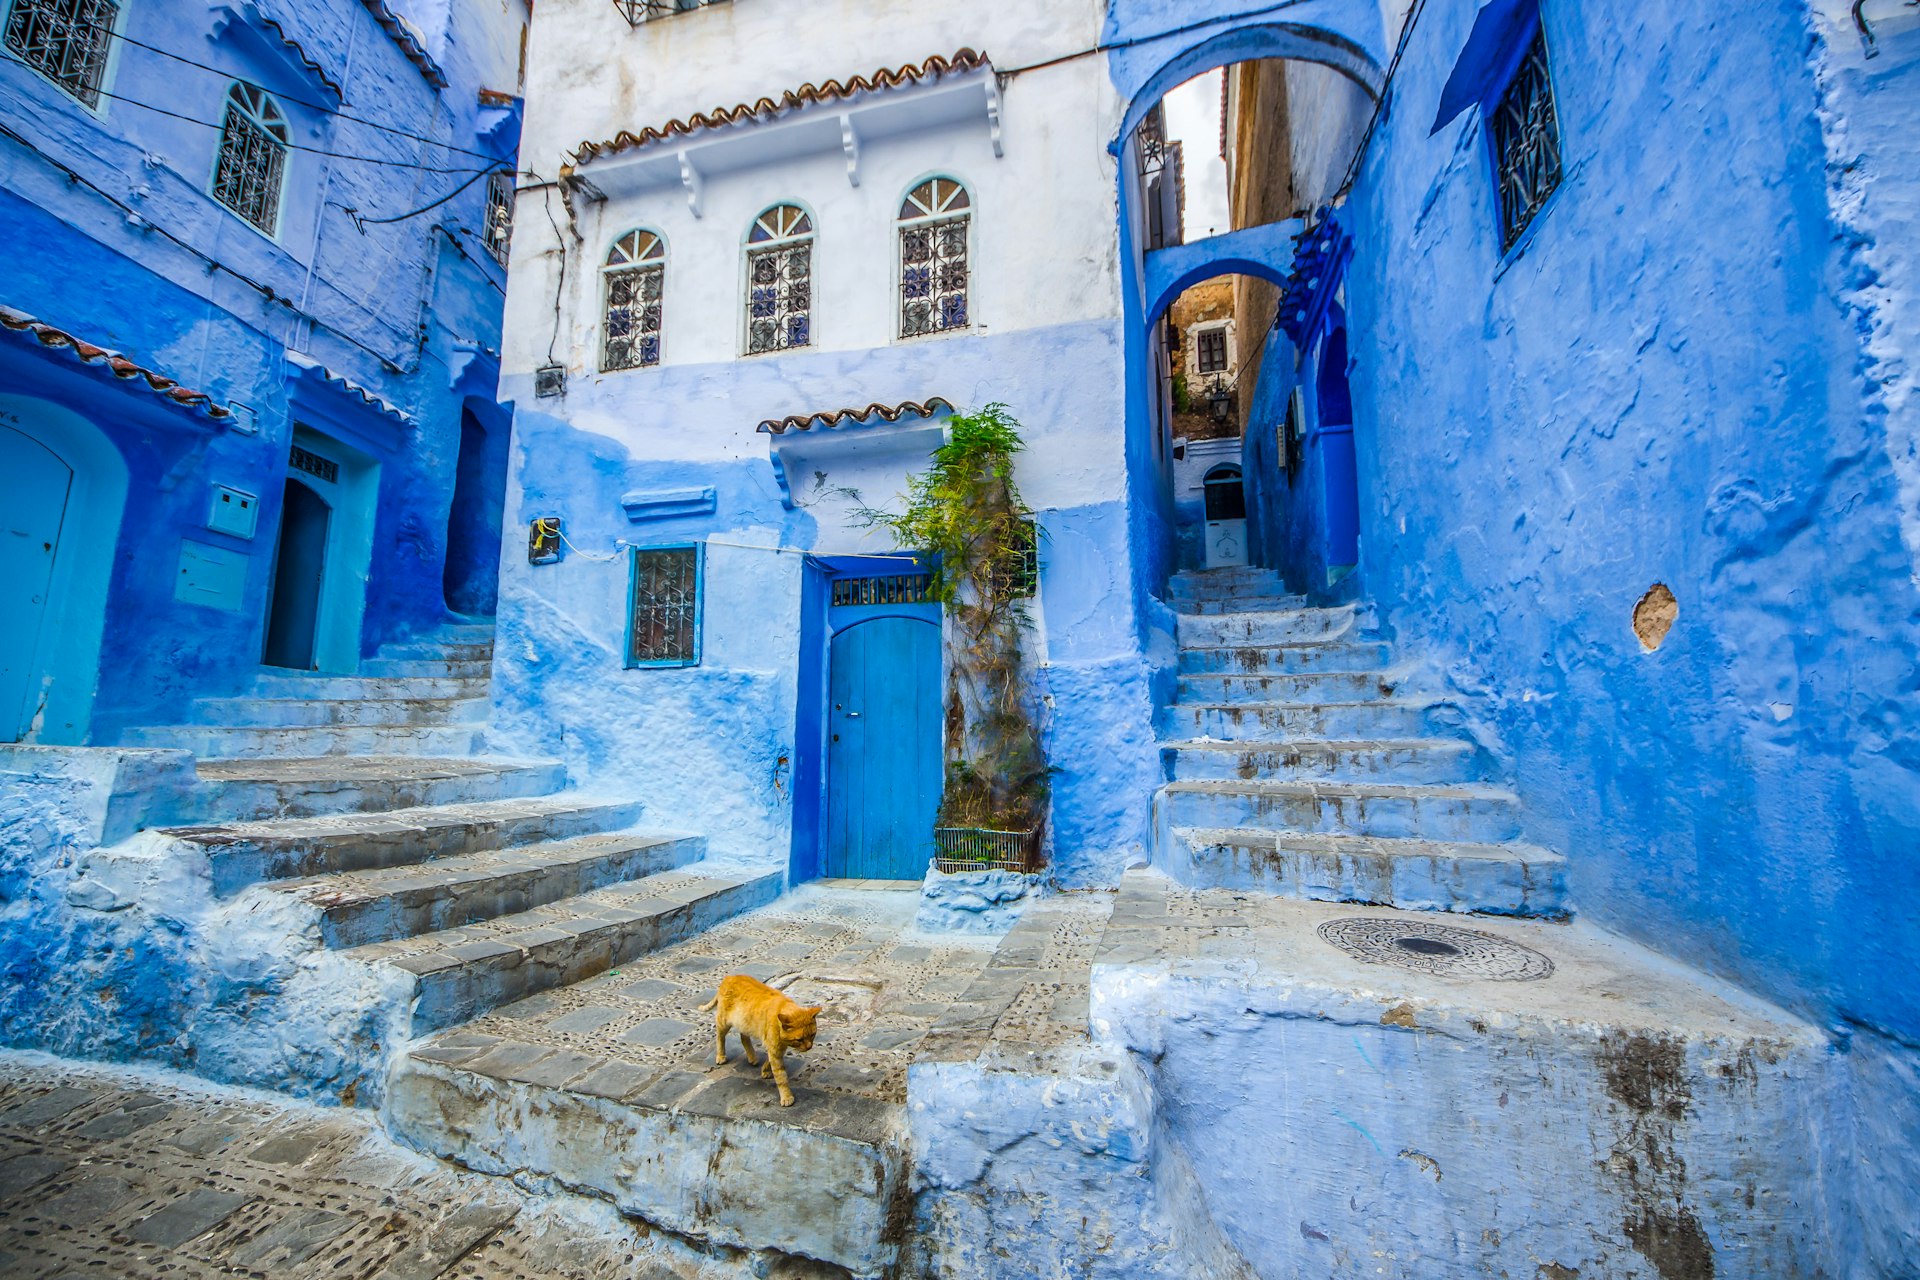 The famous blue city of Chefchaouen, Morocco